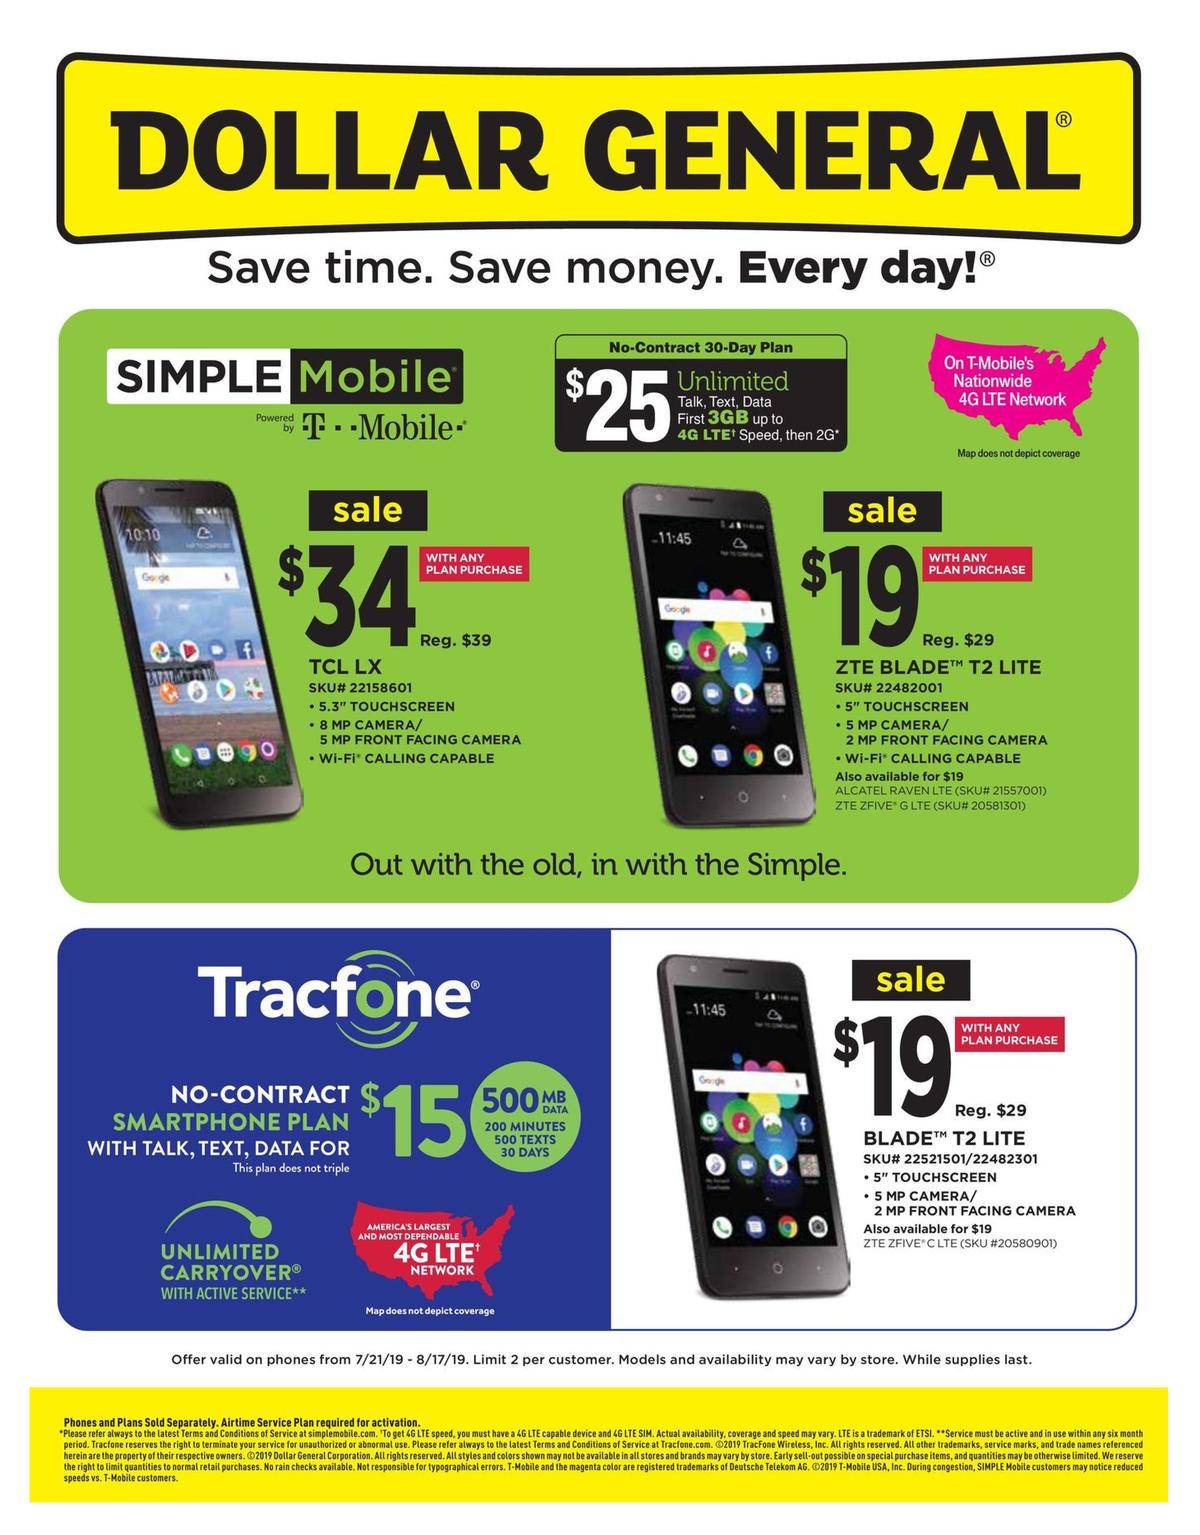 Dollar General Weekly Wireless Specials Weekly Ad from July 21